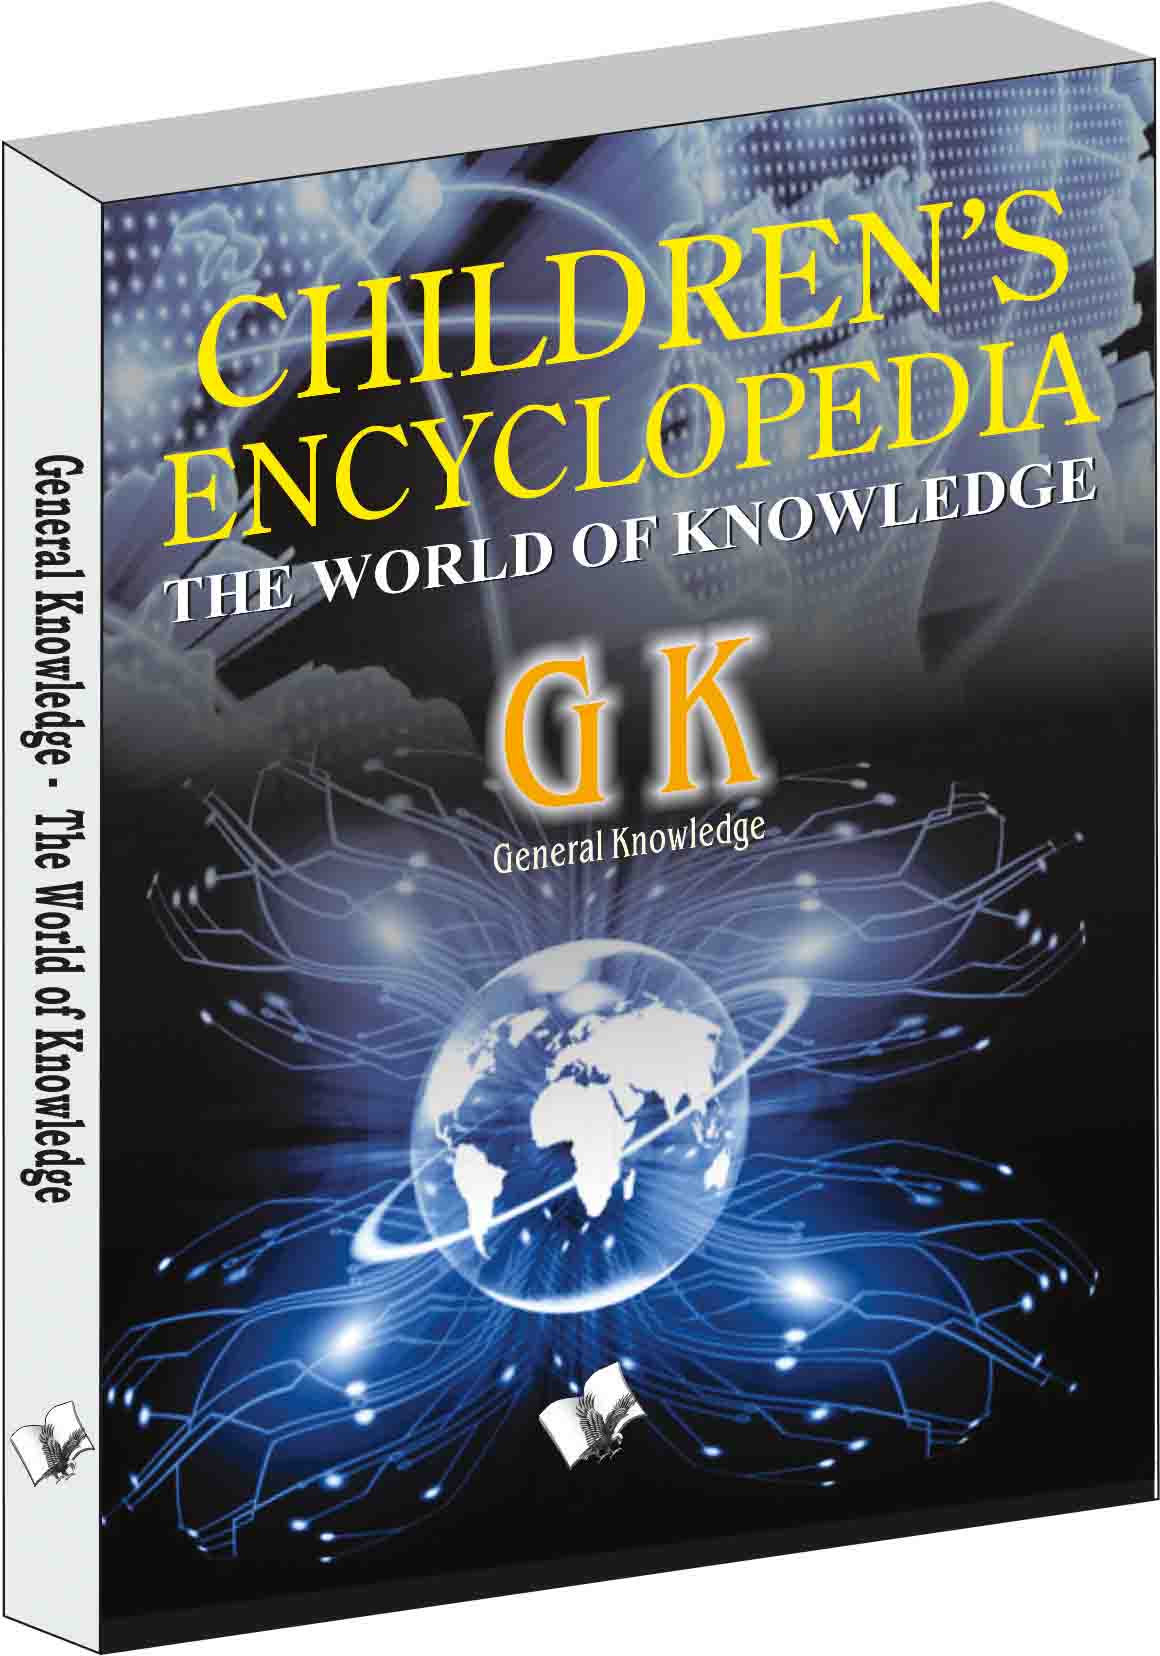 Children's encyclopedia -  General Knowledge -The World of Knowledge